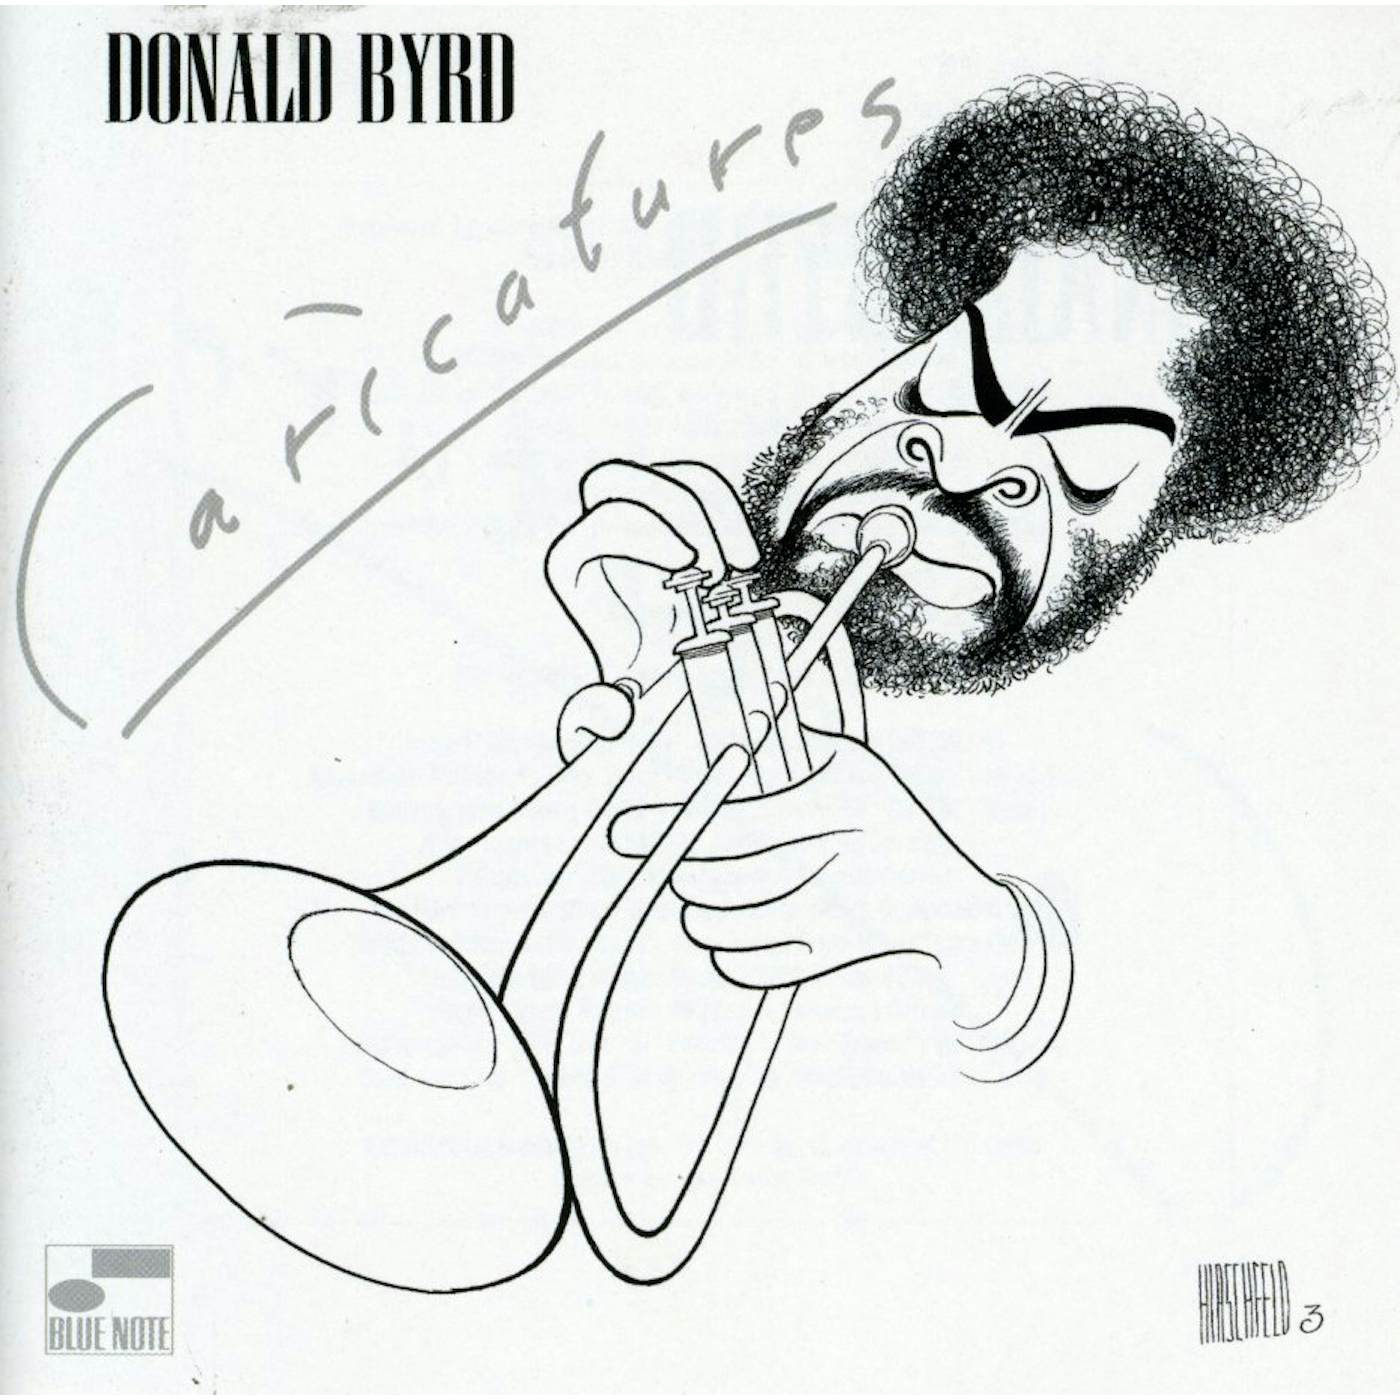 Donald Byrd CARICATURES CD